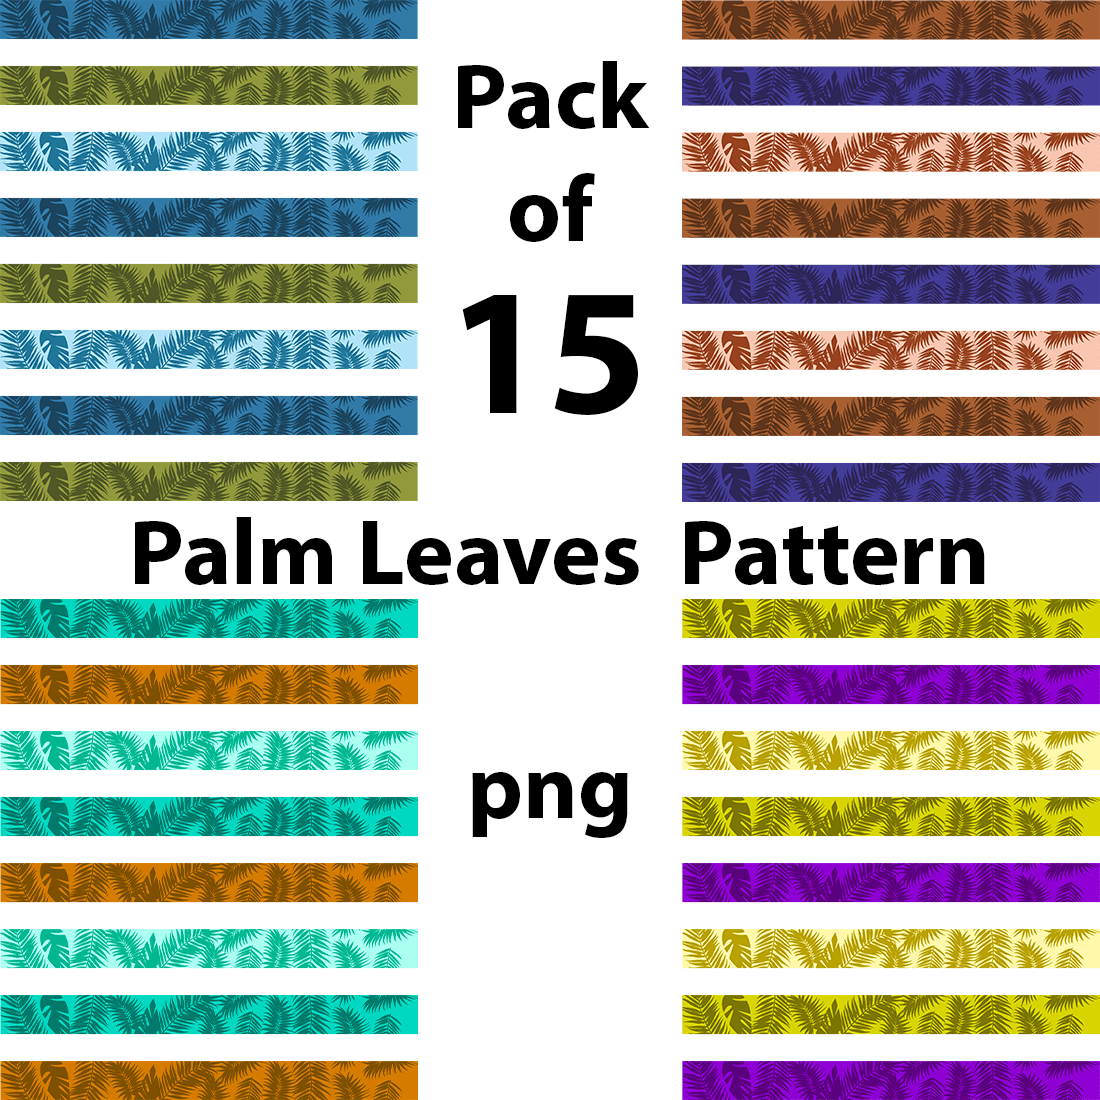 Palm Leaves Pattern cover image.